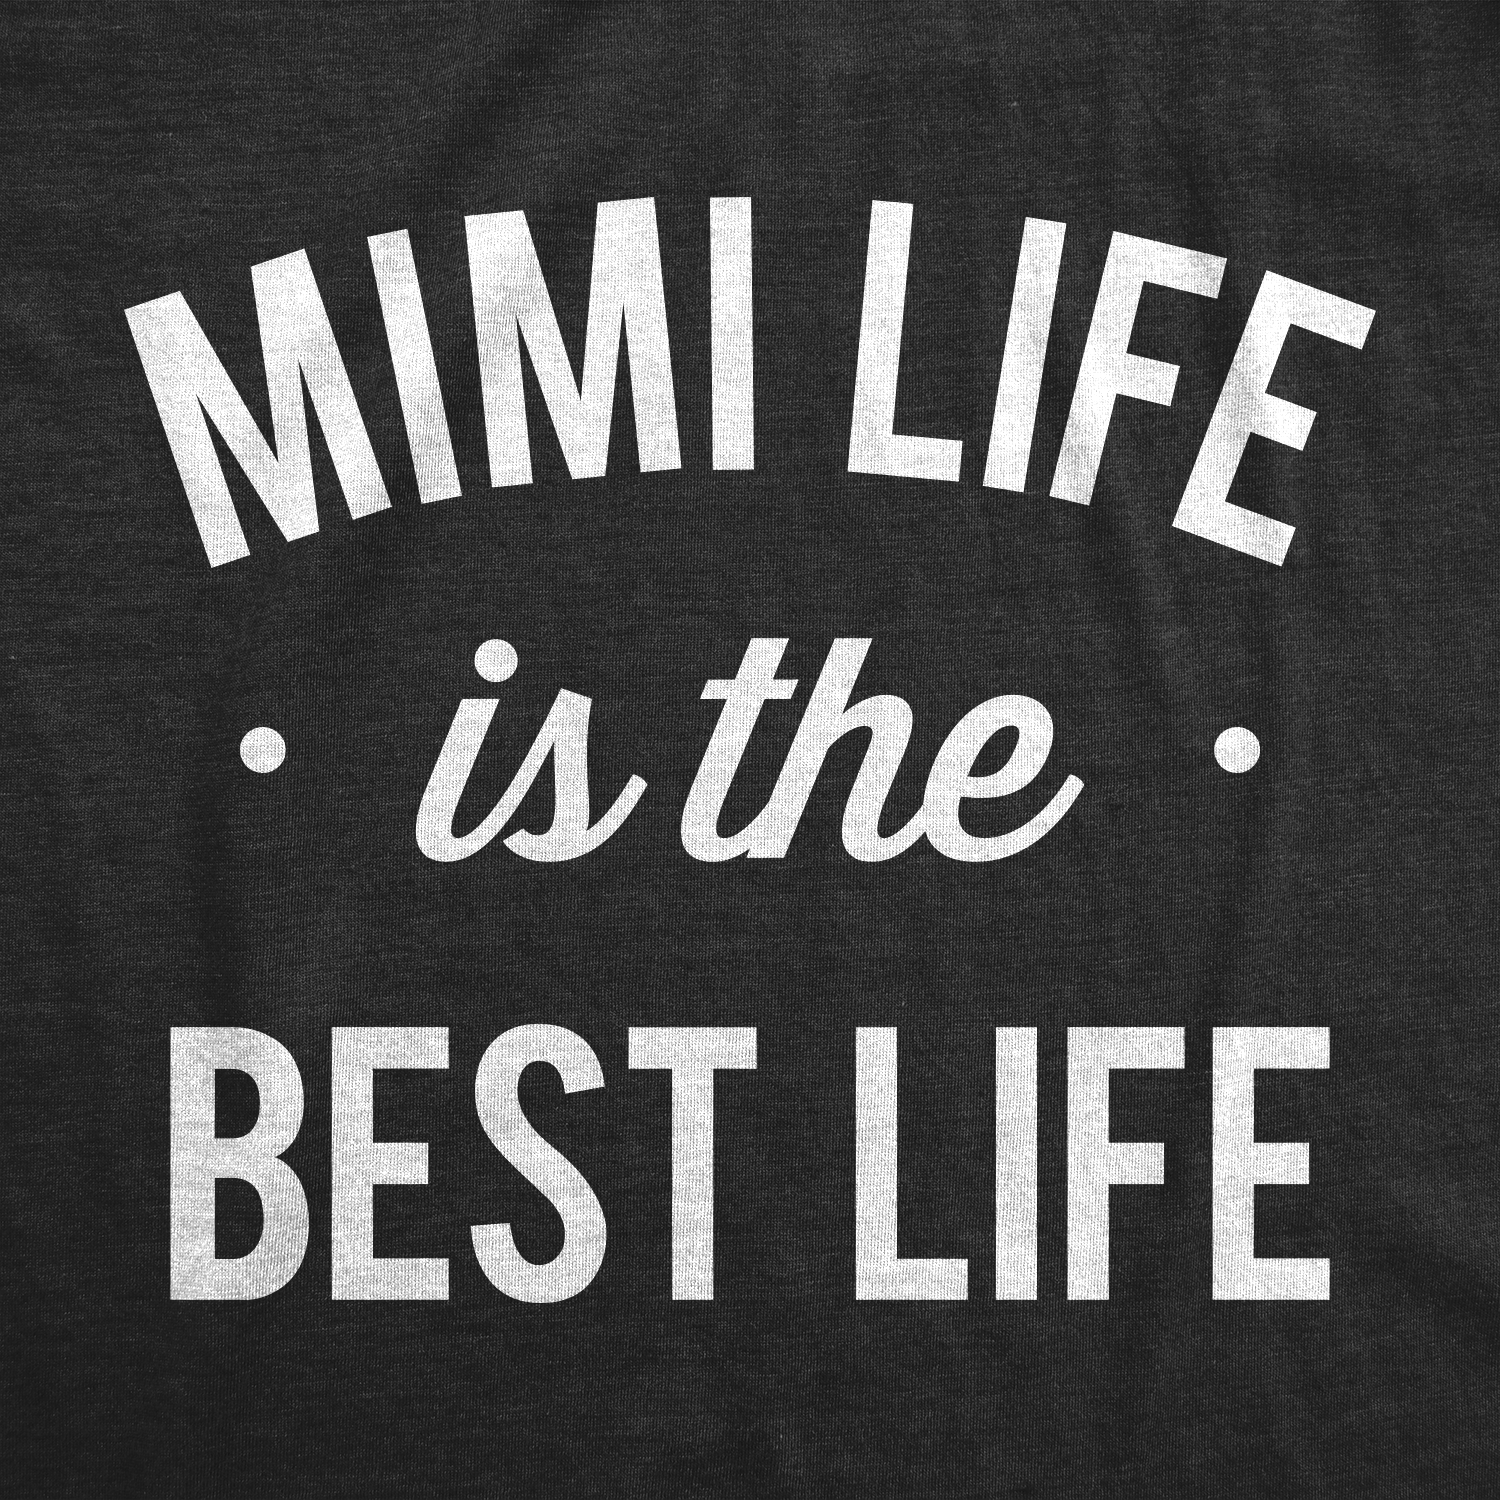 Mimi Life Is The Best Life Women's Tshirt  -  Crazy Dog T-Shirts